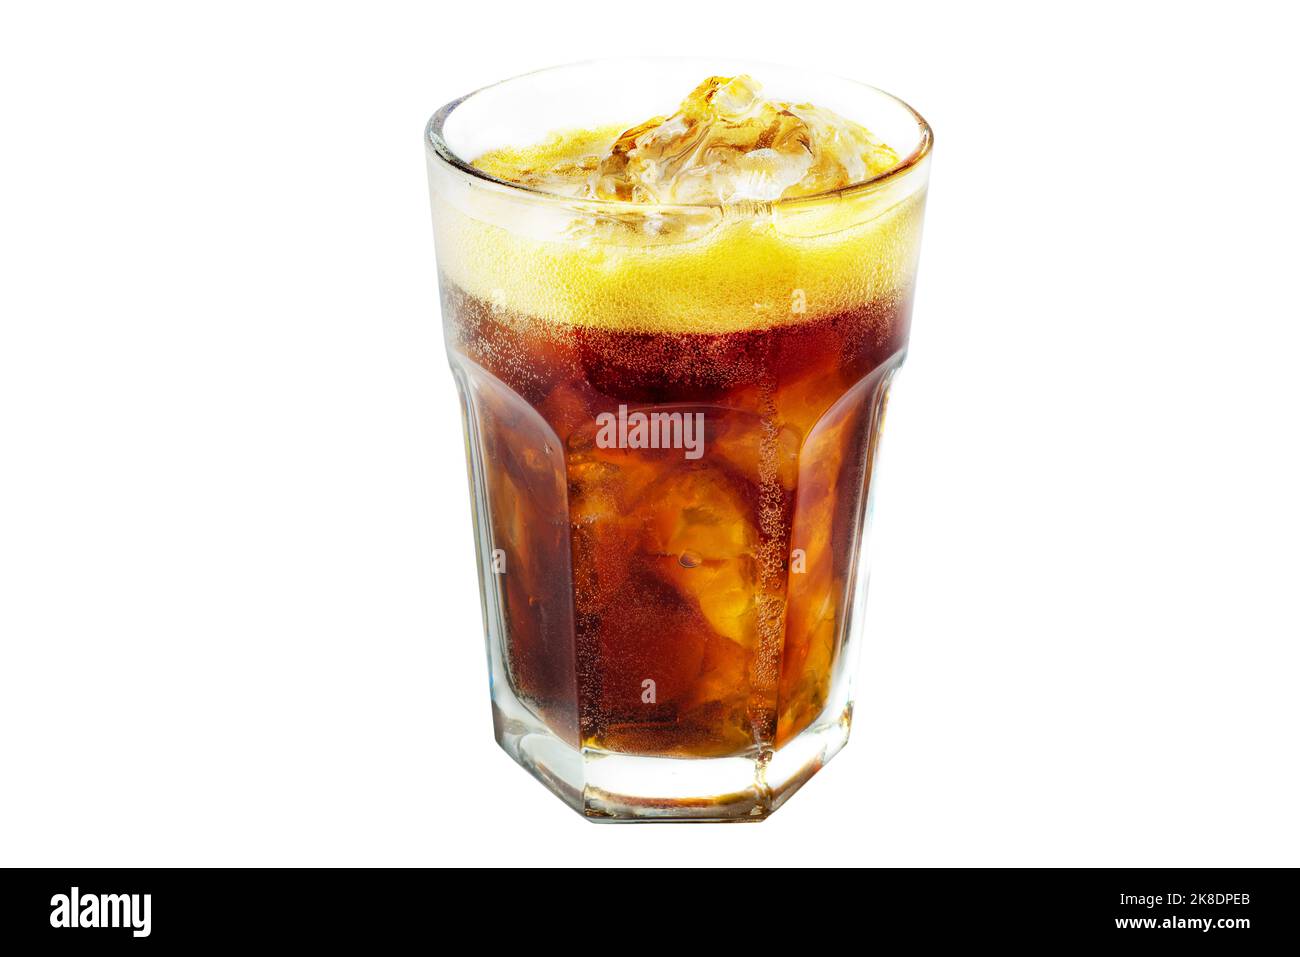 Cola with ice in a glass. Foam and air bubbles in a sweet carbonated drink. Glass carbonated beverage and ice Stock Photo